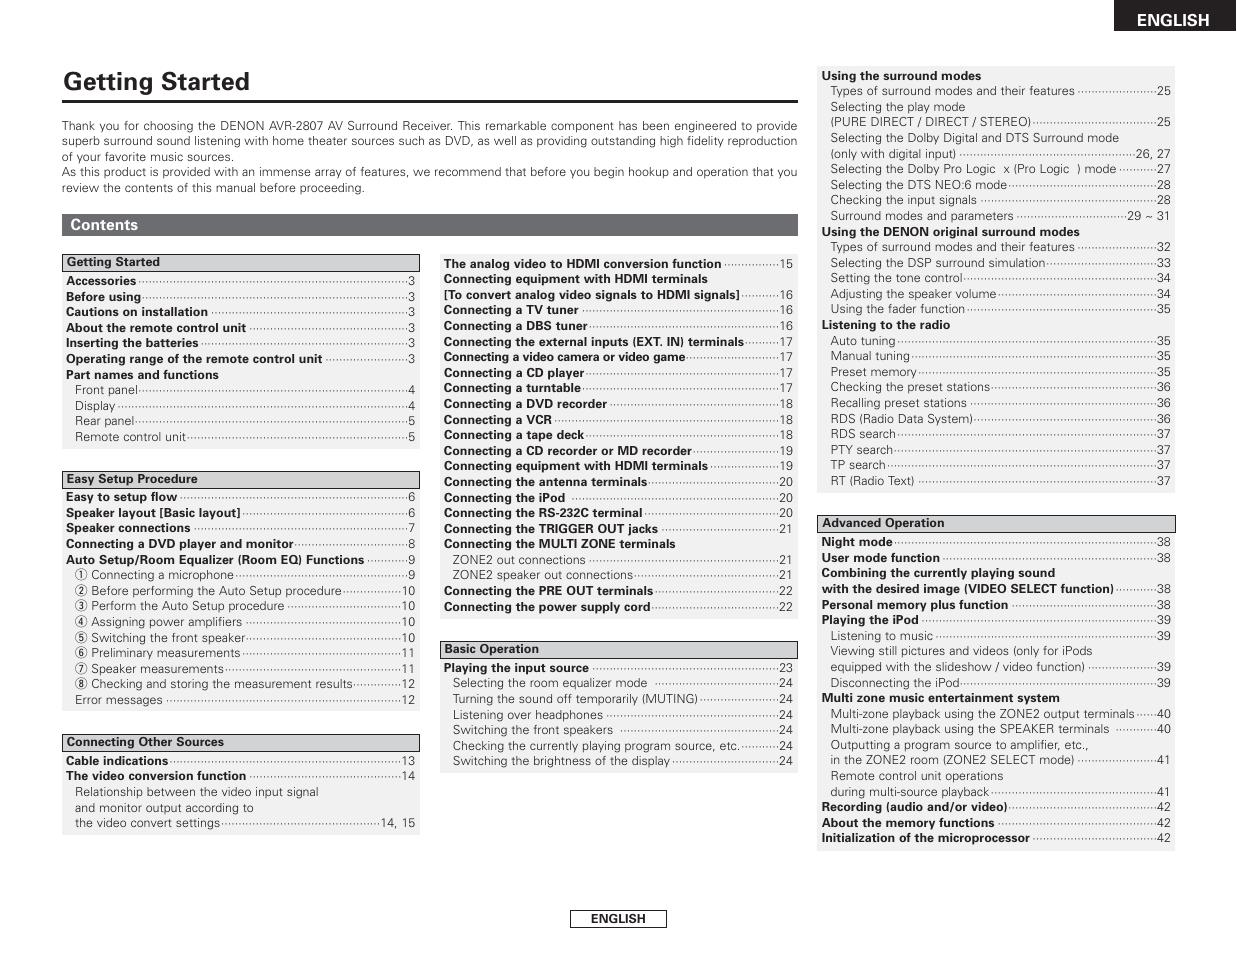 English, Getting started | Denon AVR-2807 User Manual | Page 5 / 88